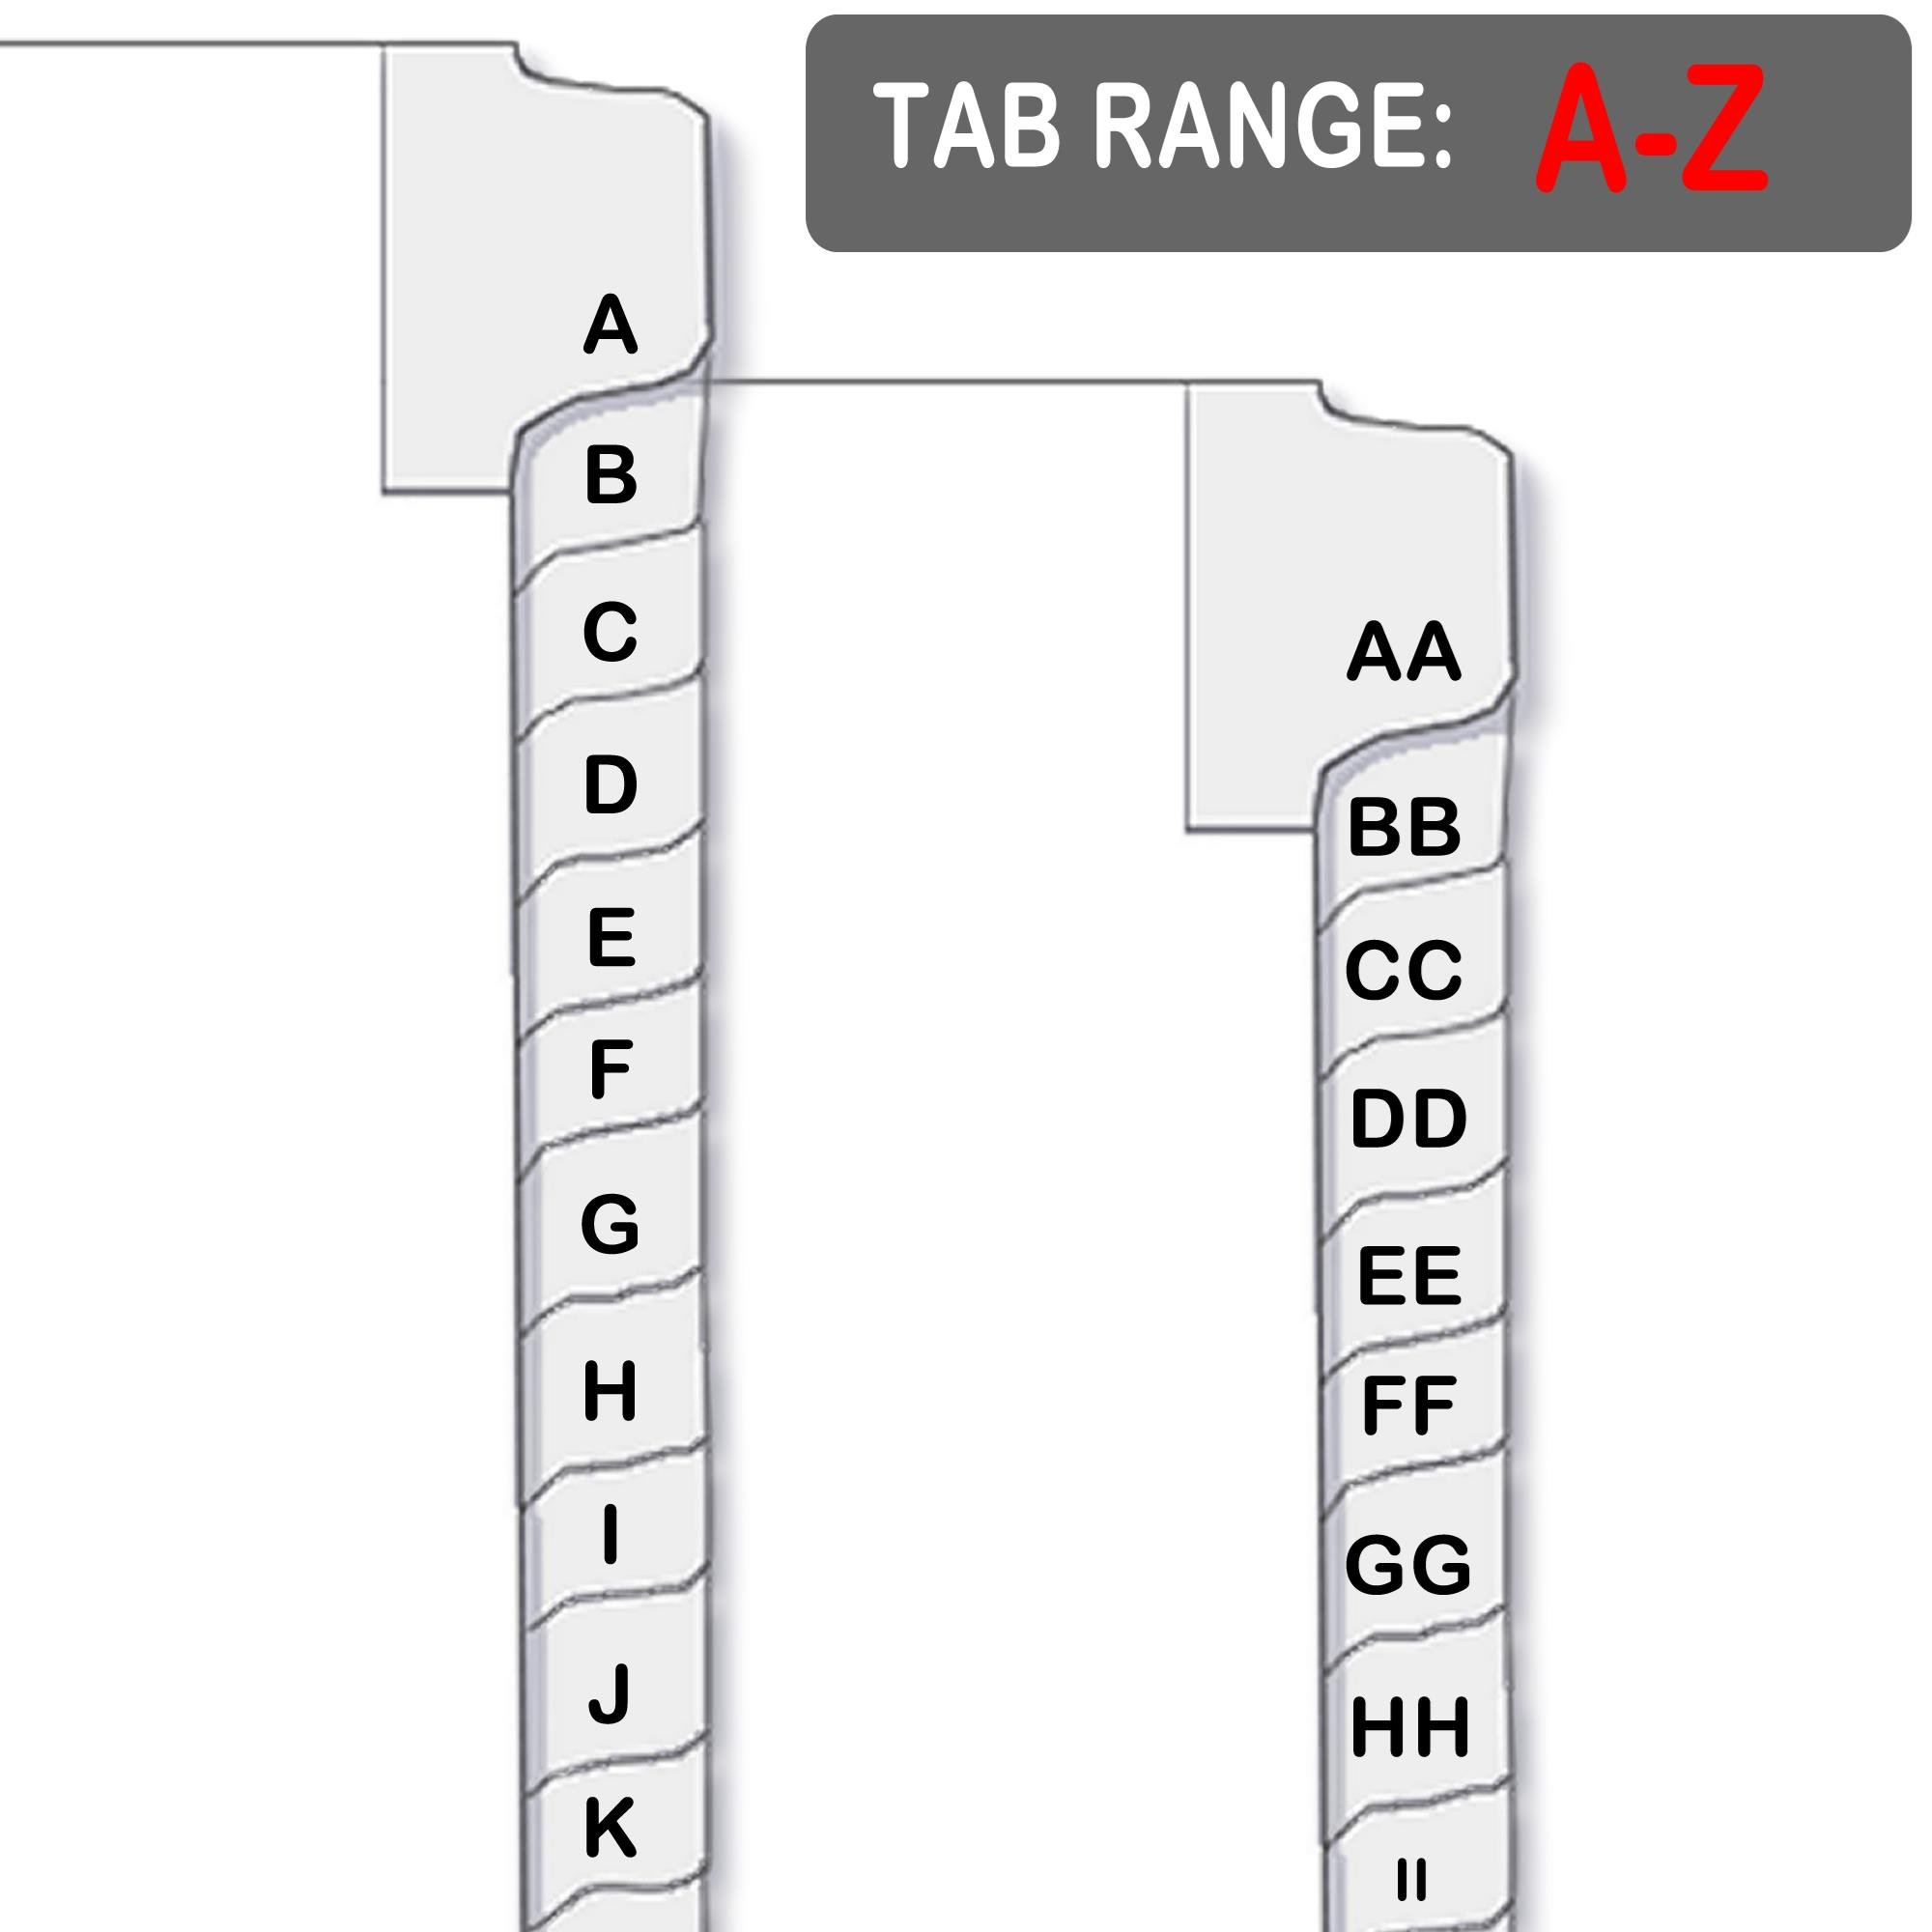 A-Z Side Letter Tabs - Collated Avery Legal Index Dividers